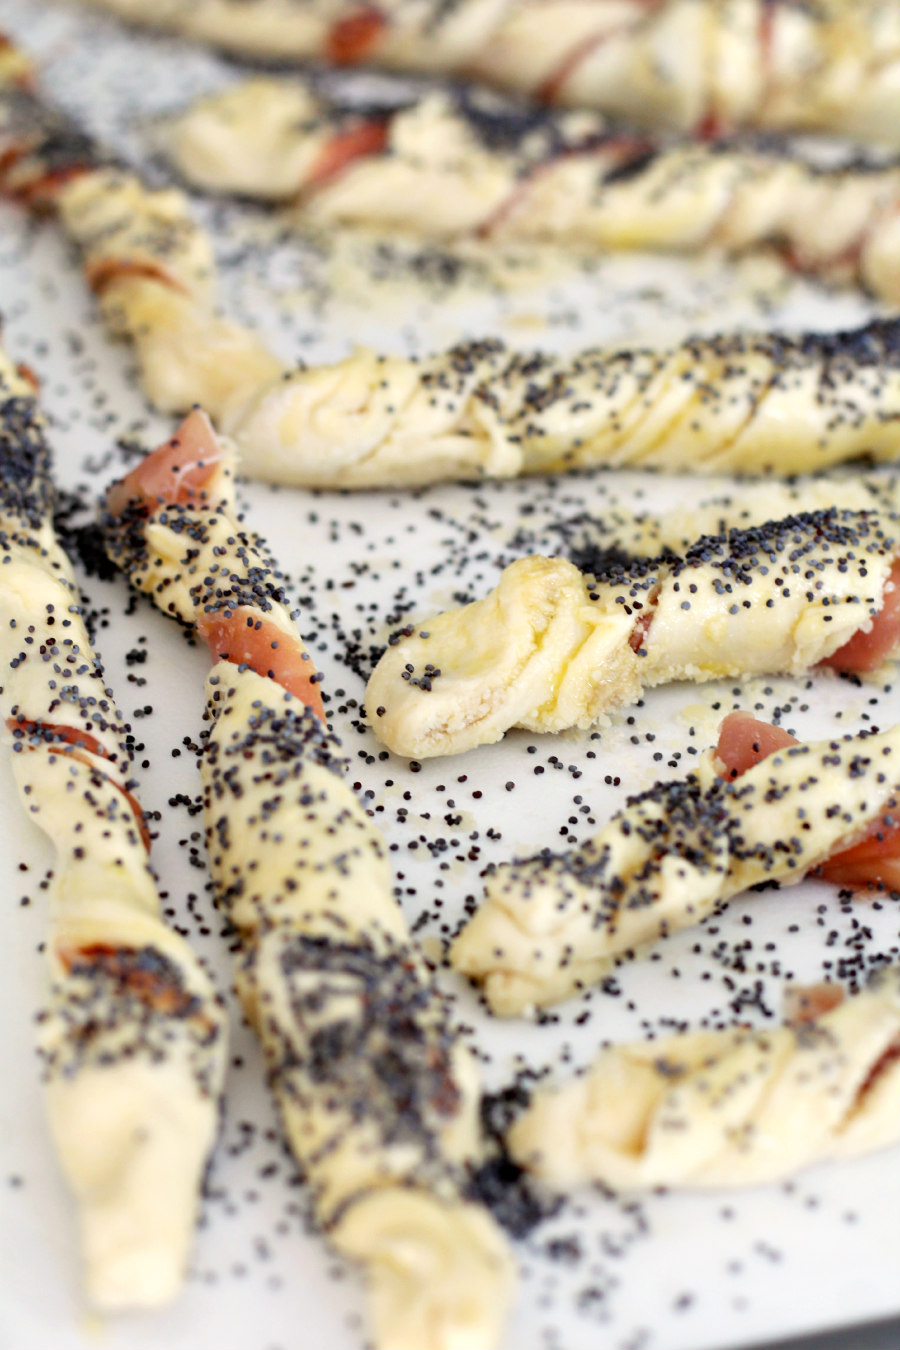 Puff pastry dough twisted into wands and sprinkled with poppy seeds.